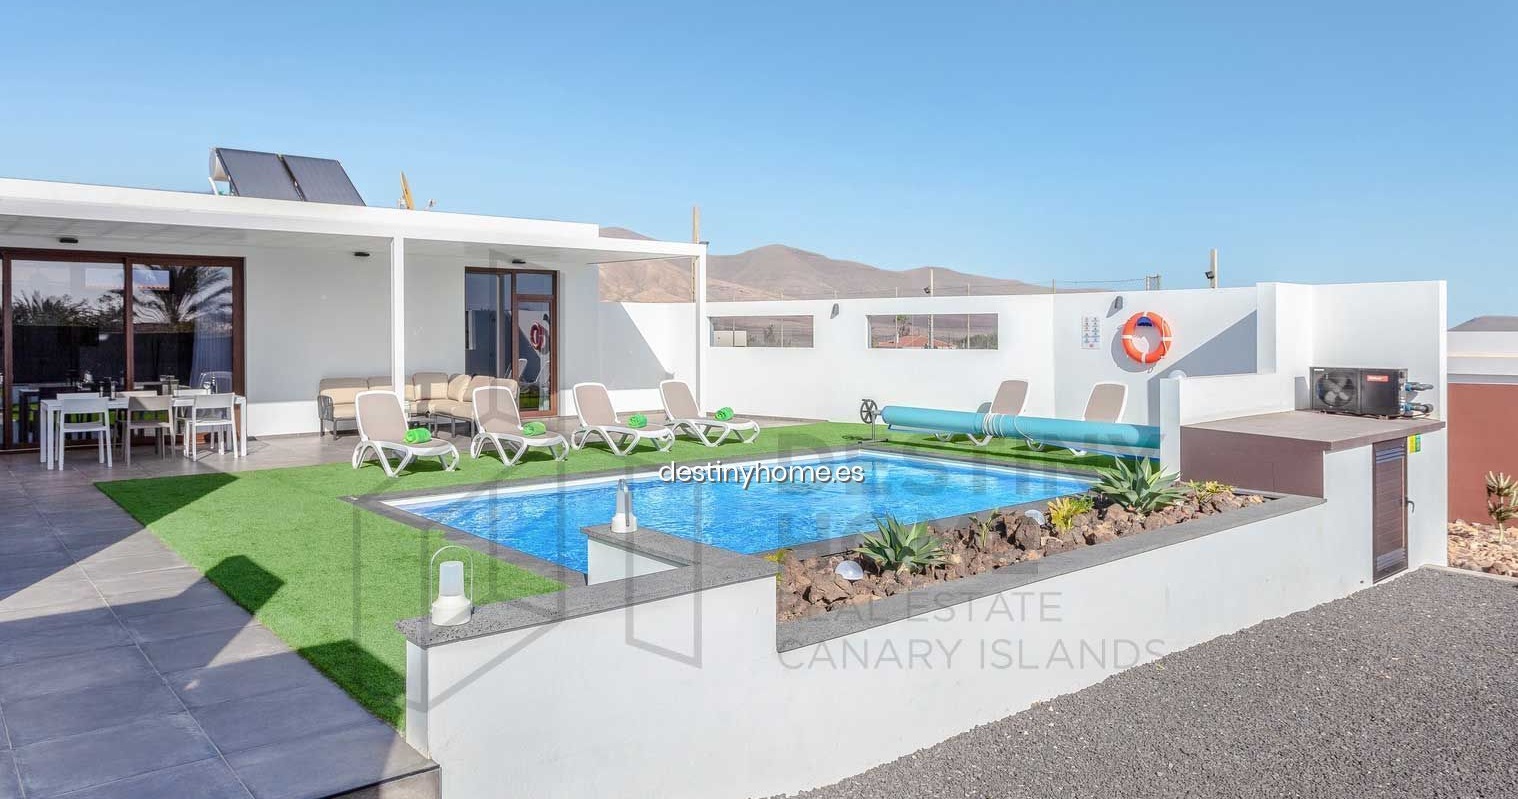 What taxes must be paid to sell a home in Fuerteventura?